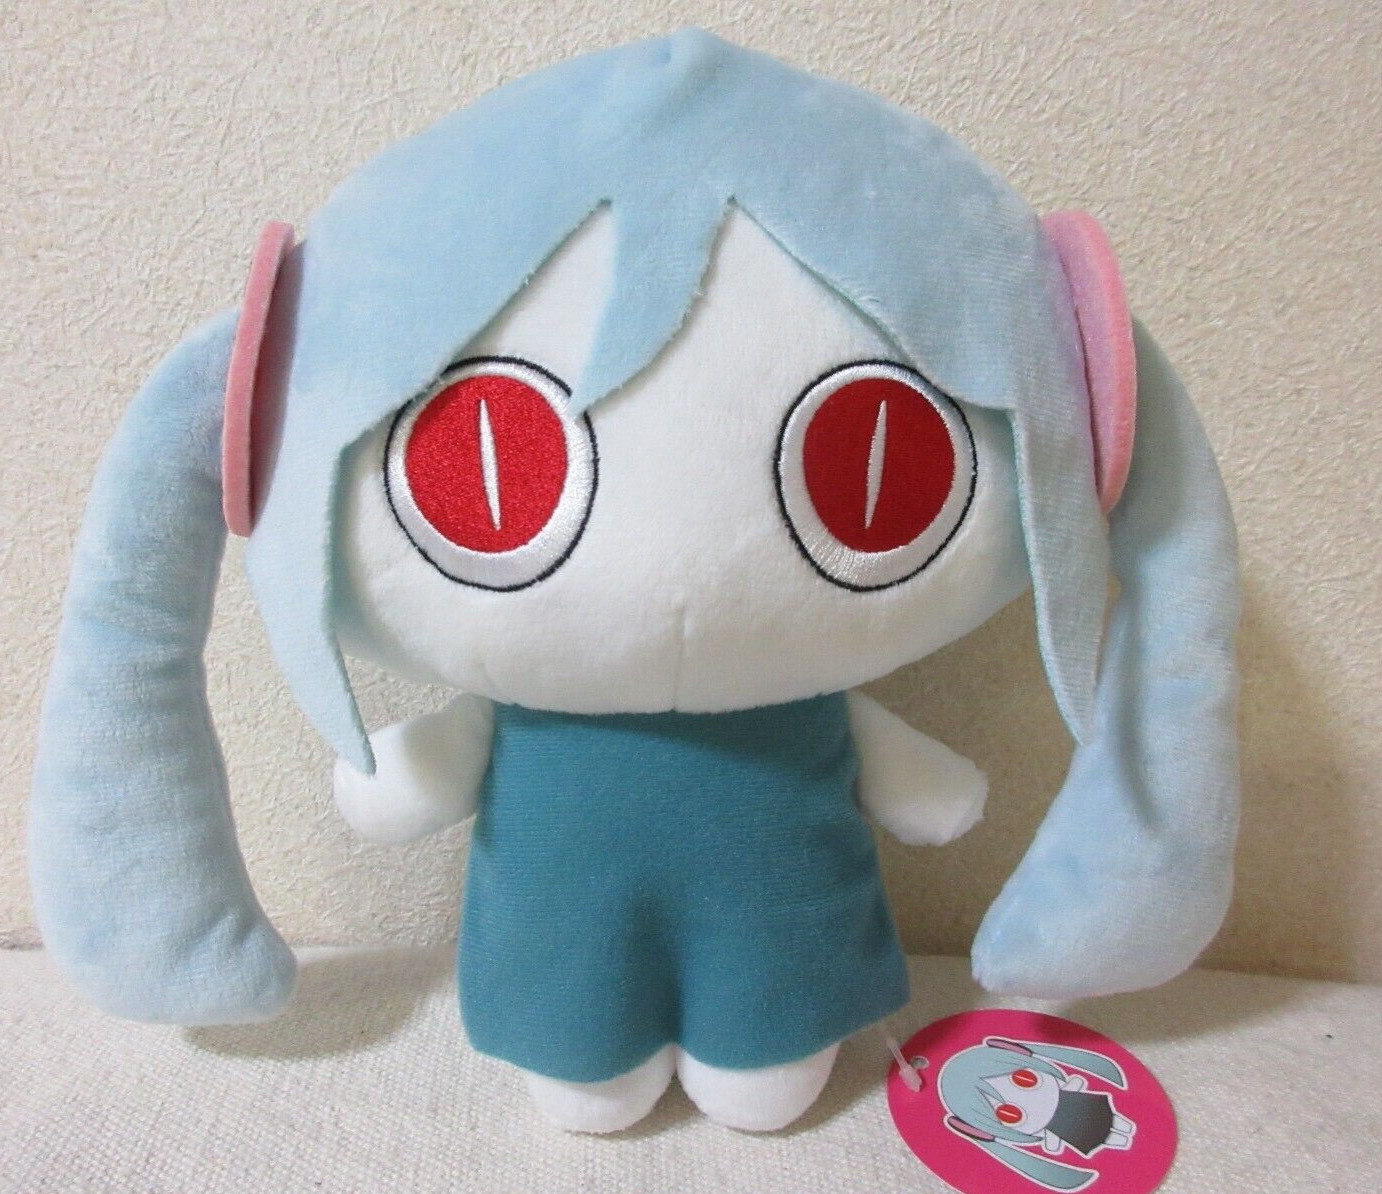 Aimaina BIG Plush Doll Stuffed Toy Round One limited 25cm From Japan